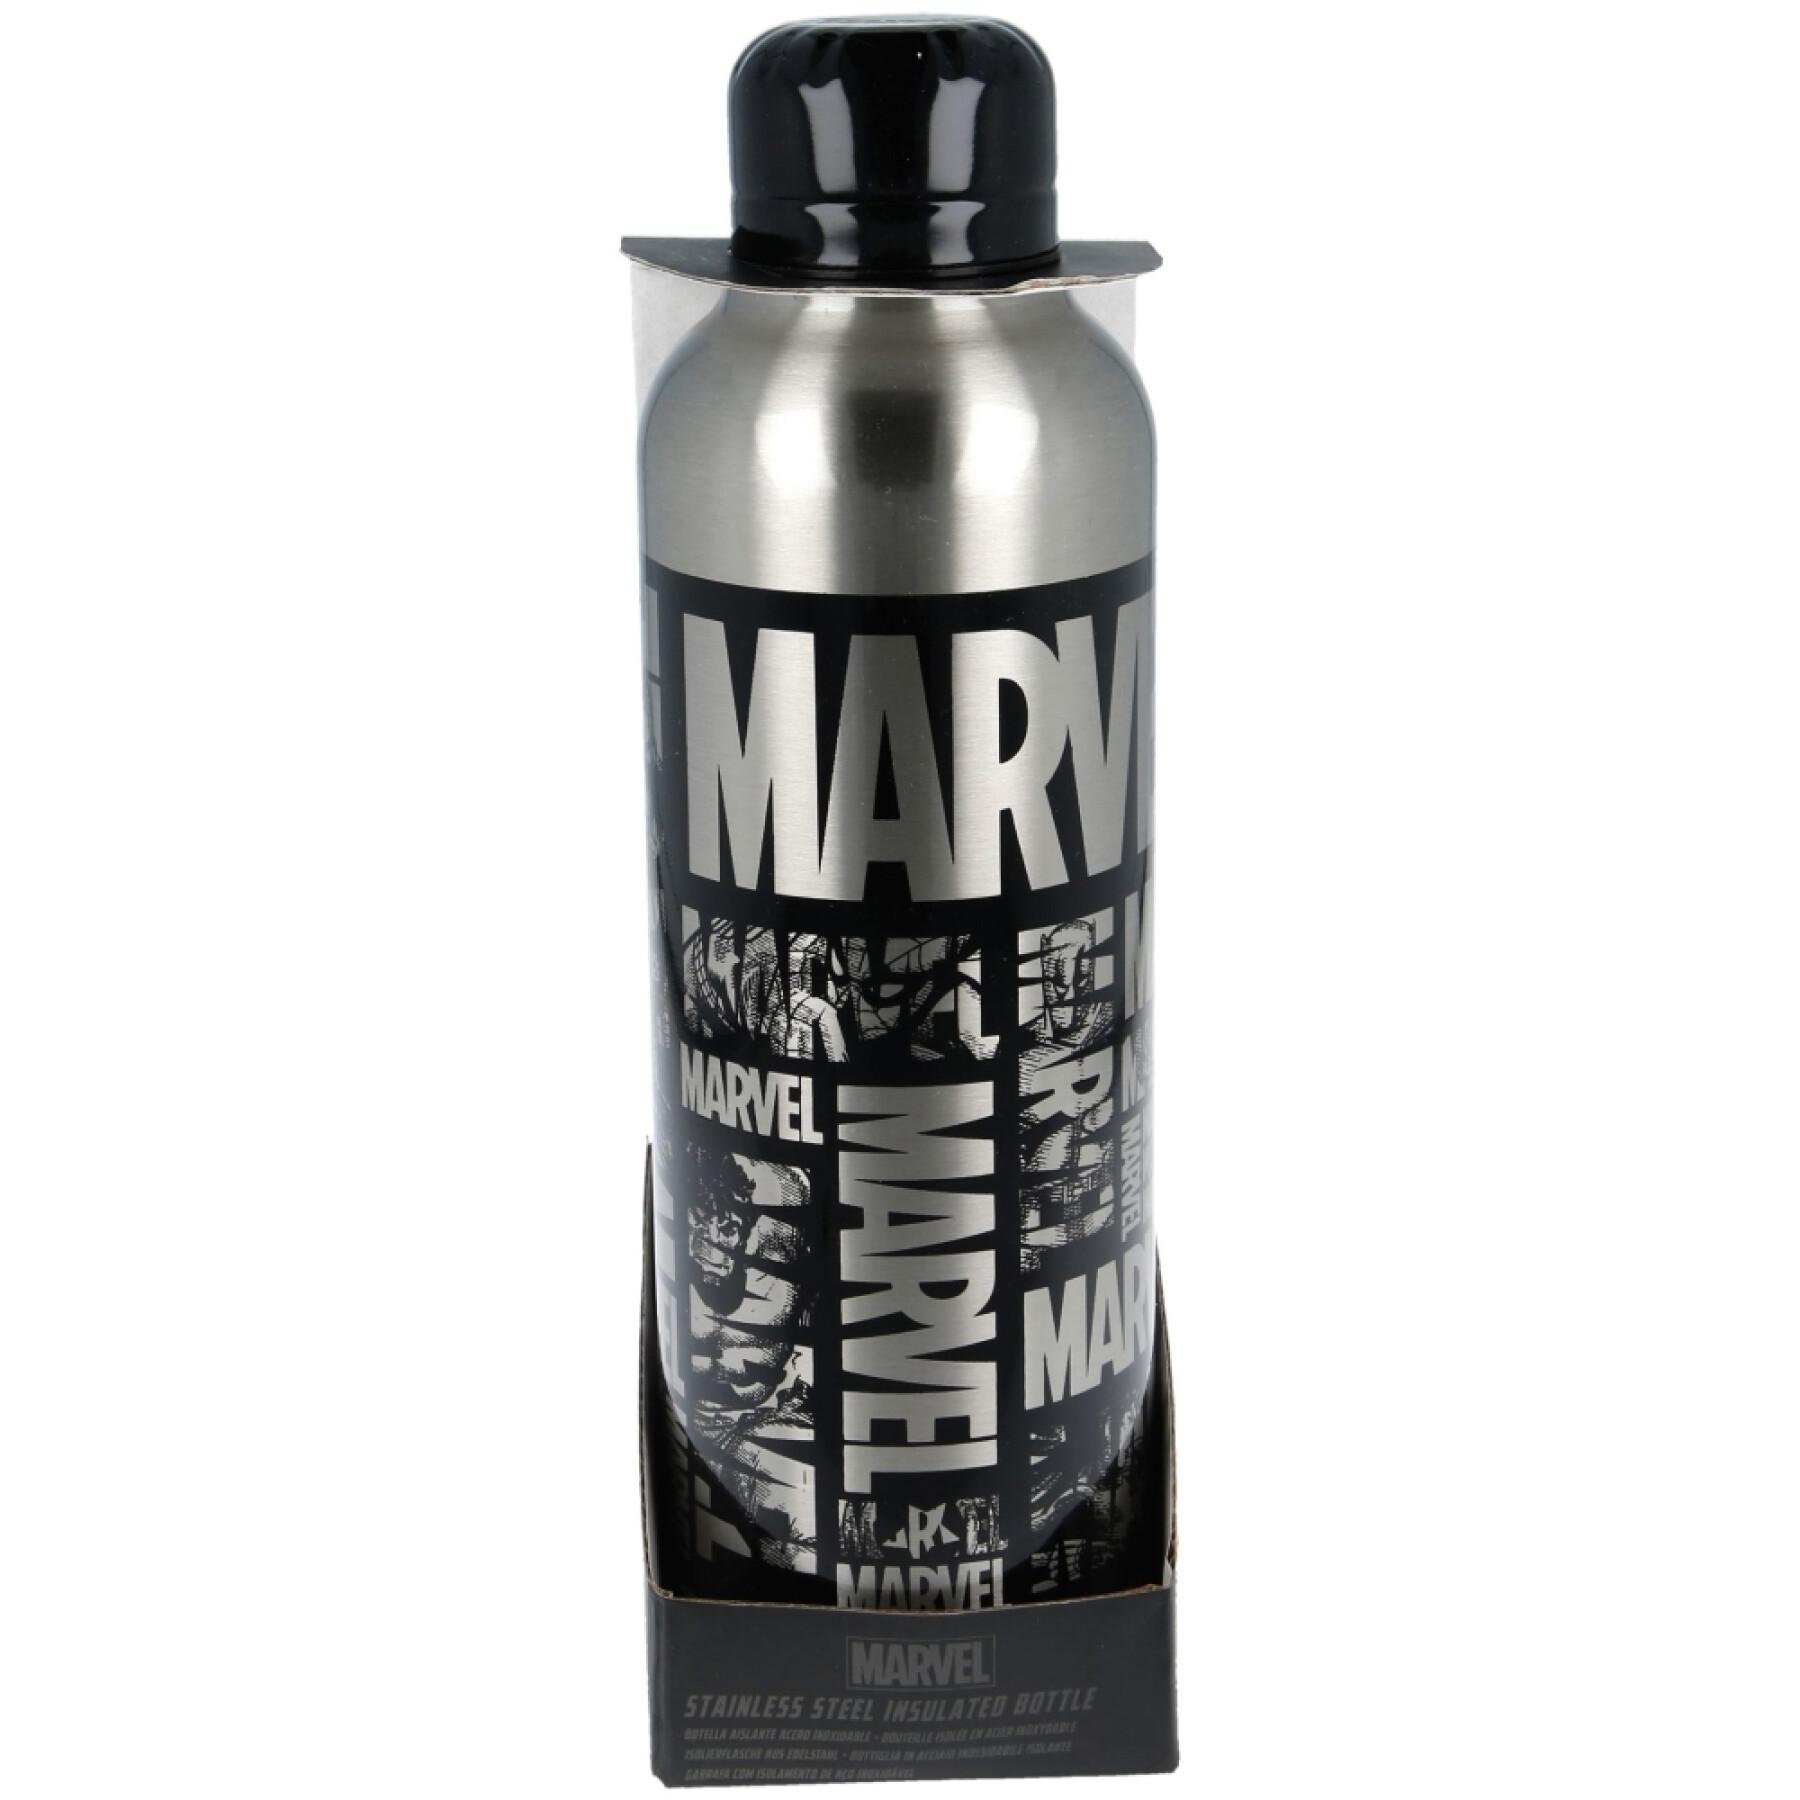 Stainless steel thermal flask Marvel